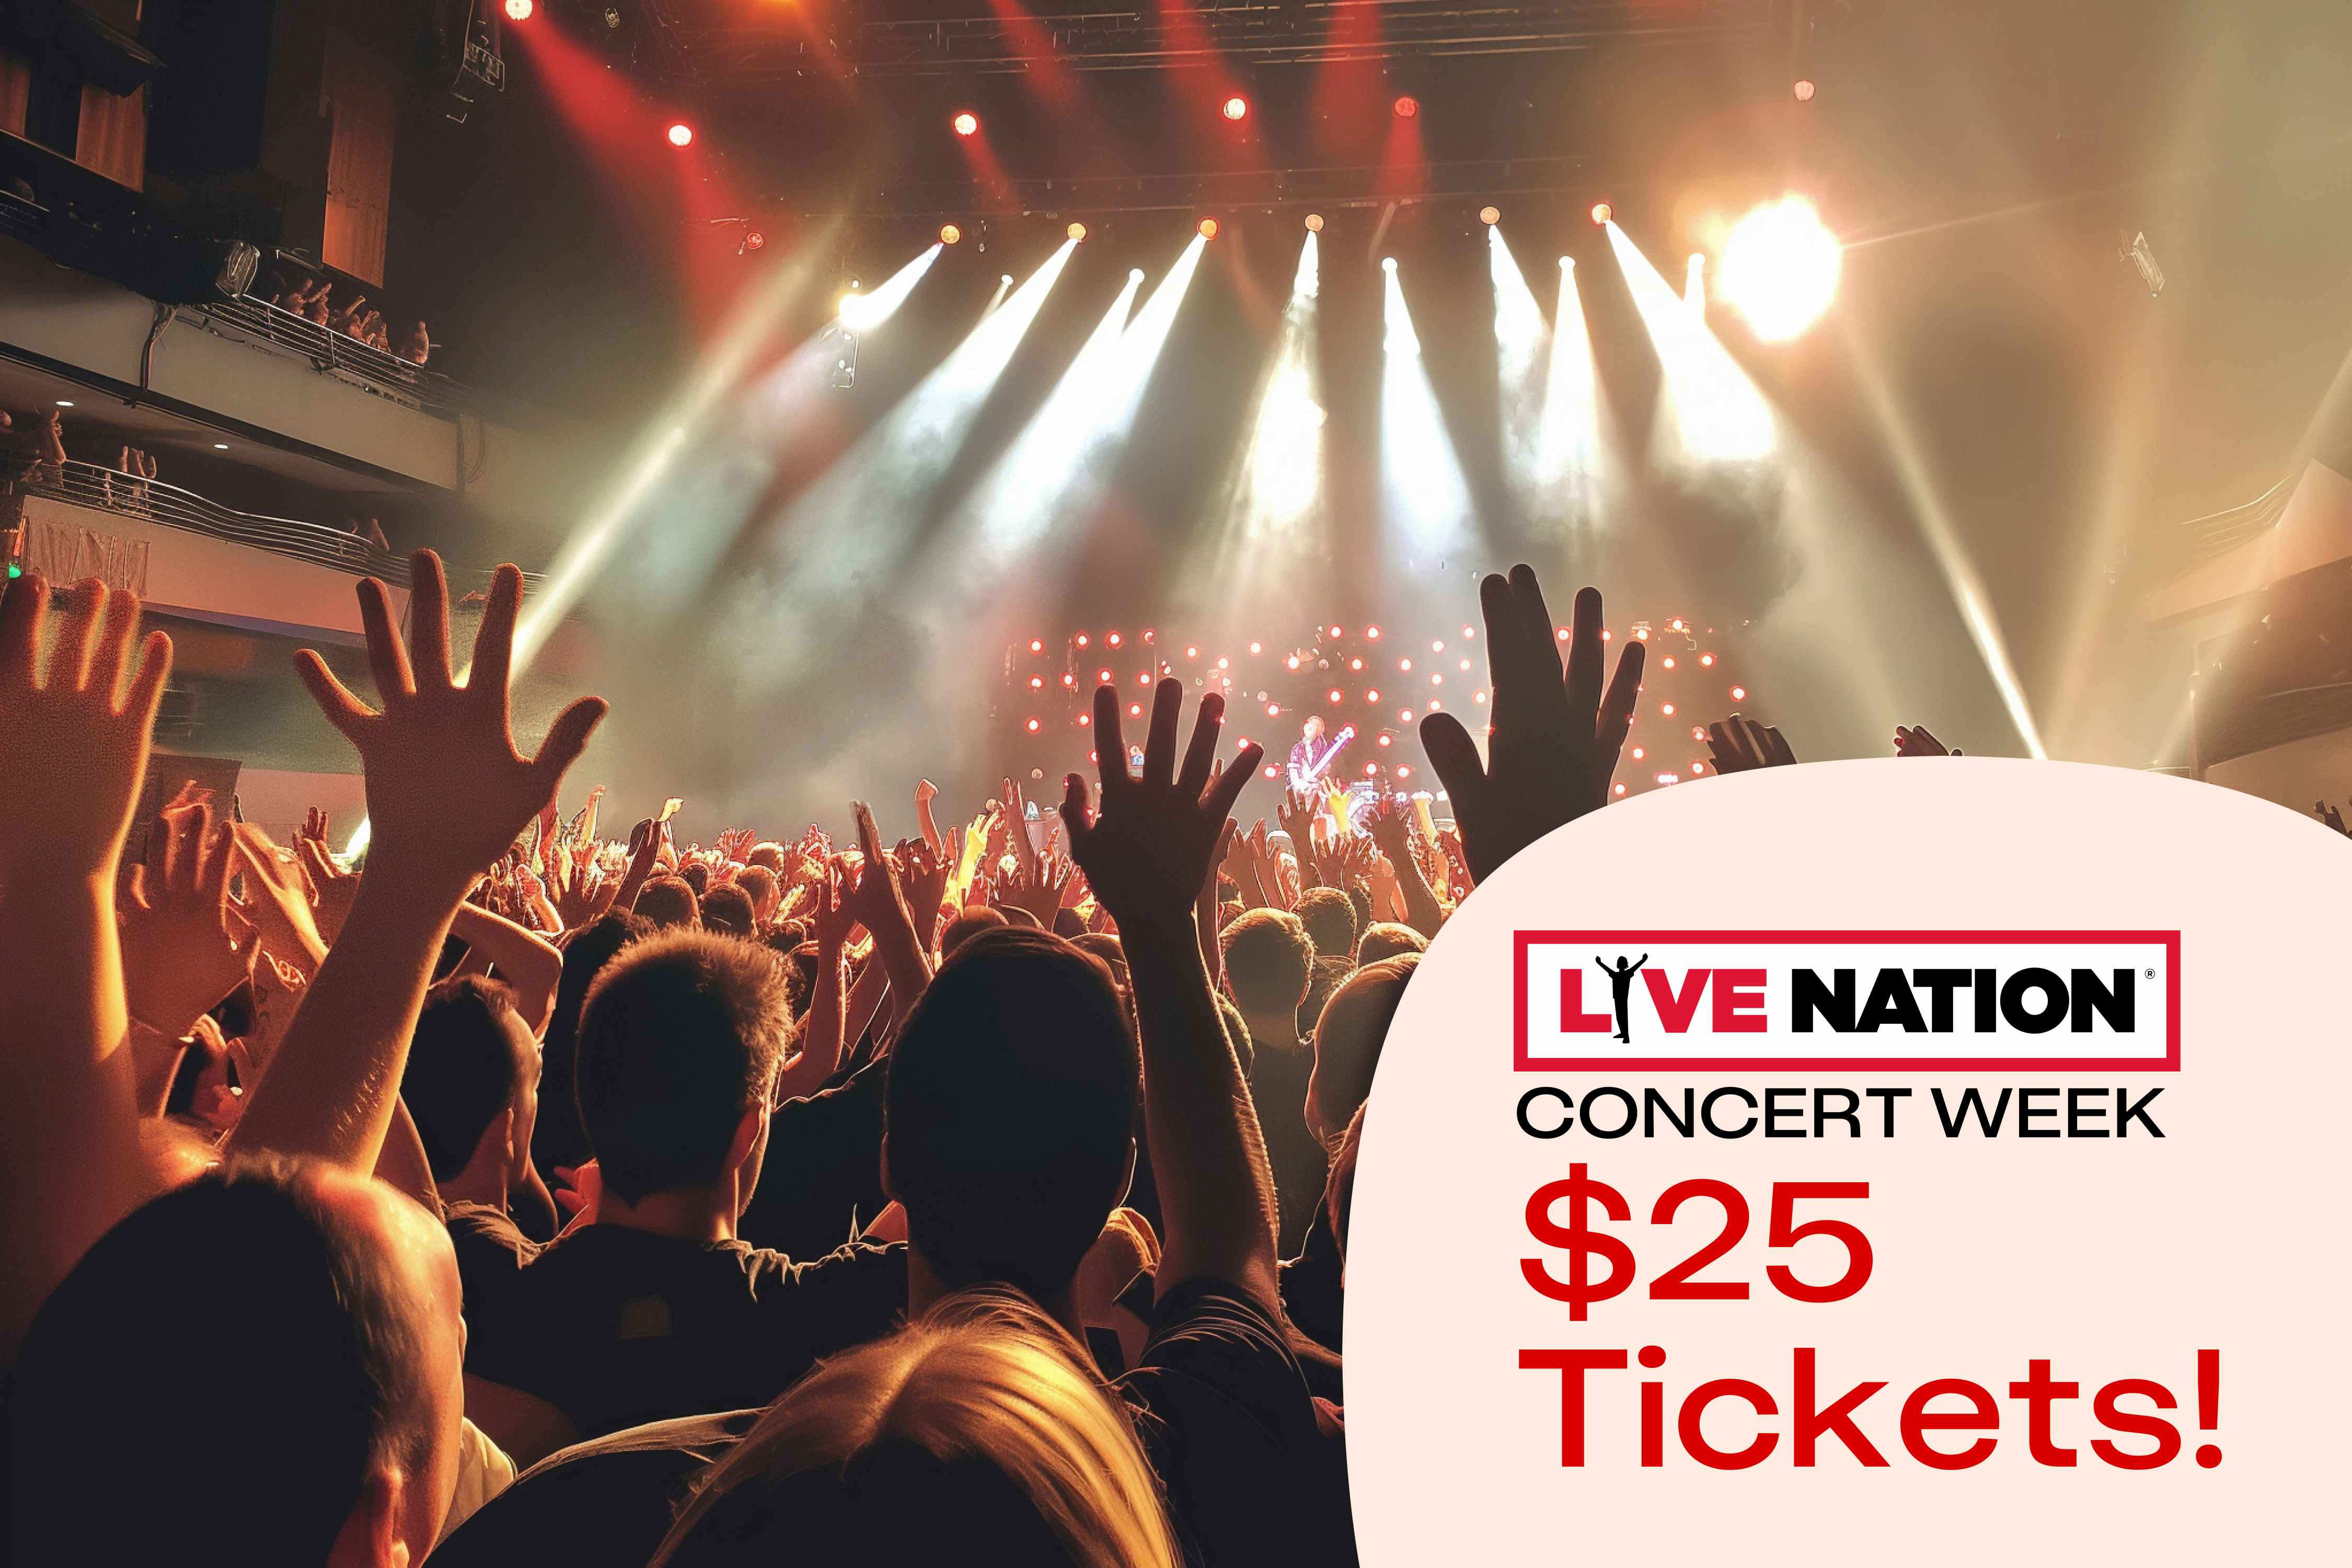 Live Nation Concert Week Is Happening May 8 - 14! How to Score $25 Tickets